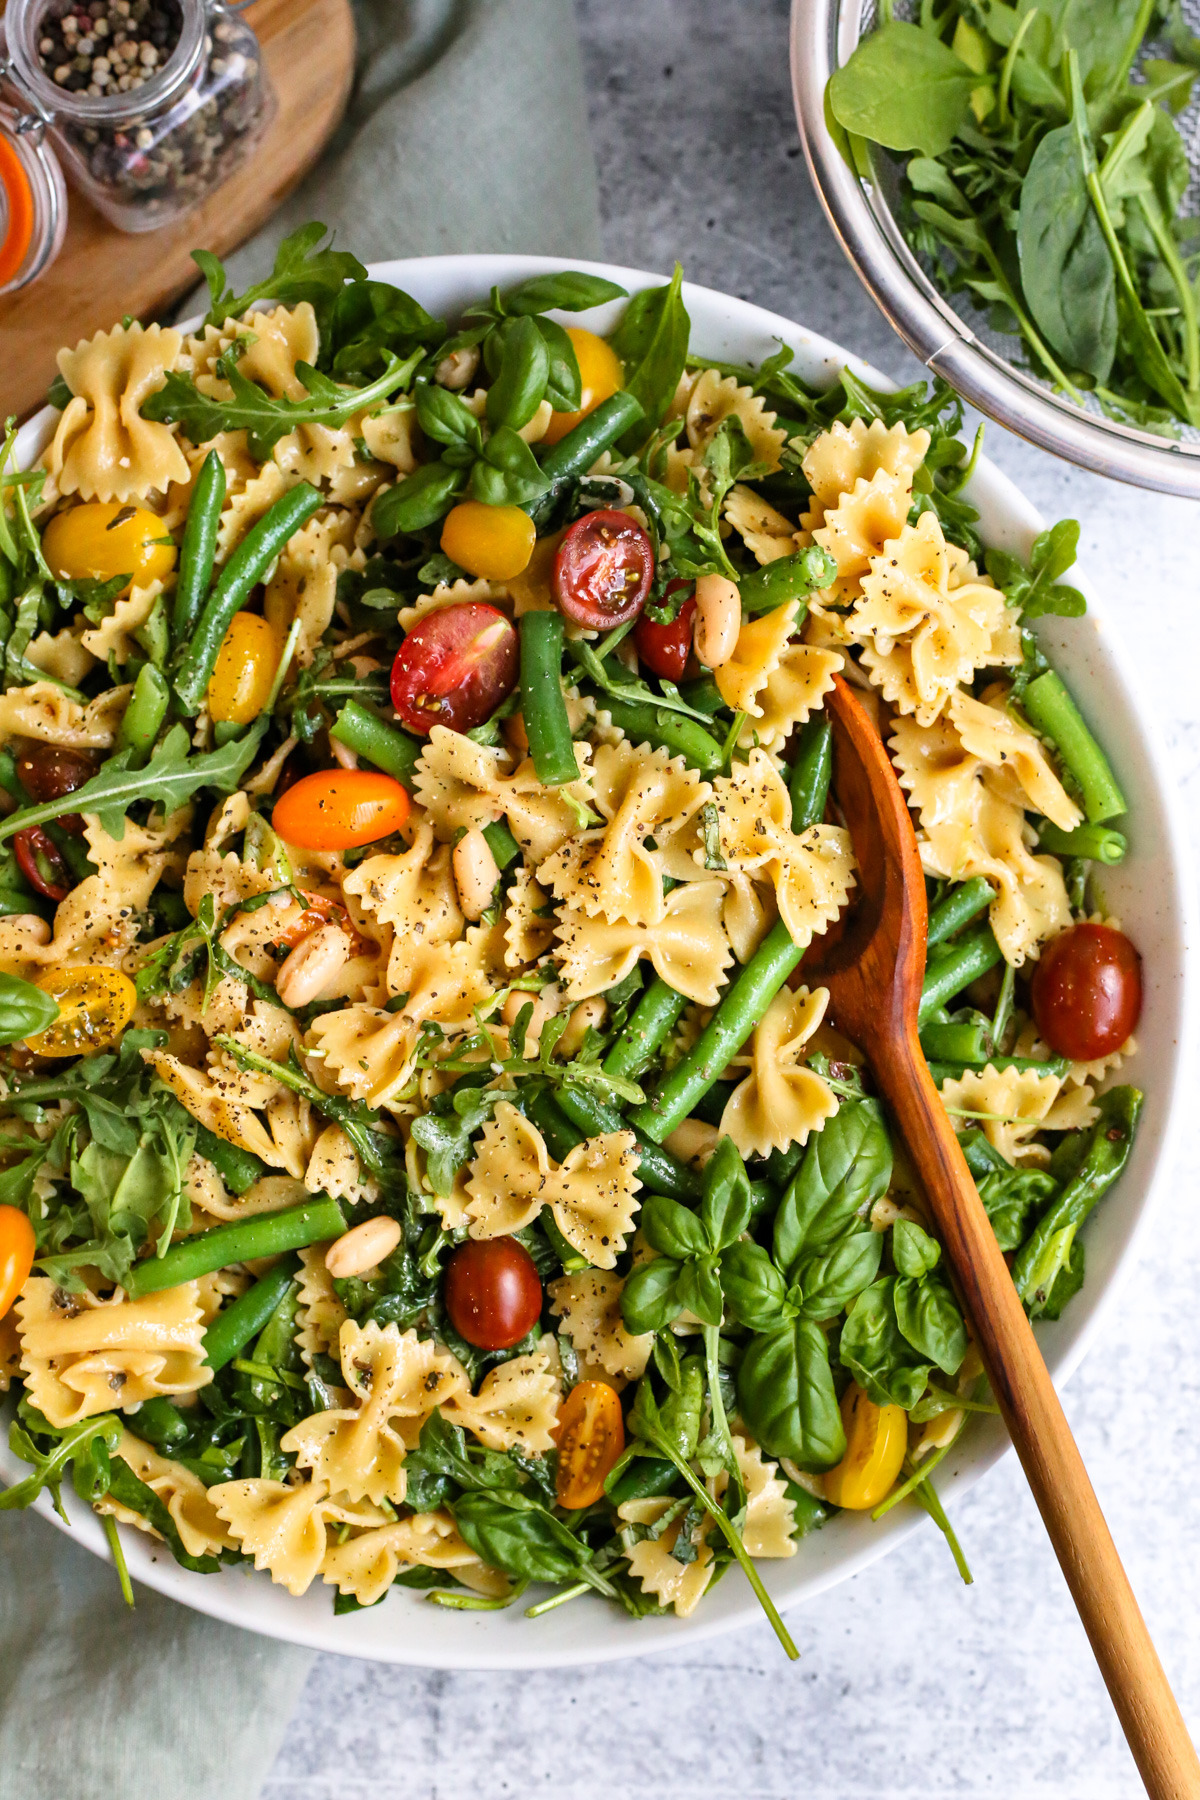 Overhead view of a beans and greens pasta salad, with colorful and vibrant veggies, cracked black pepper, and fresh basil garnishing the serving dish